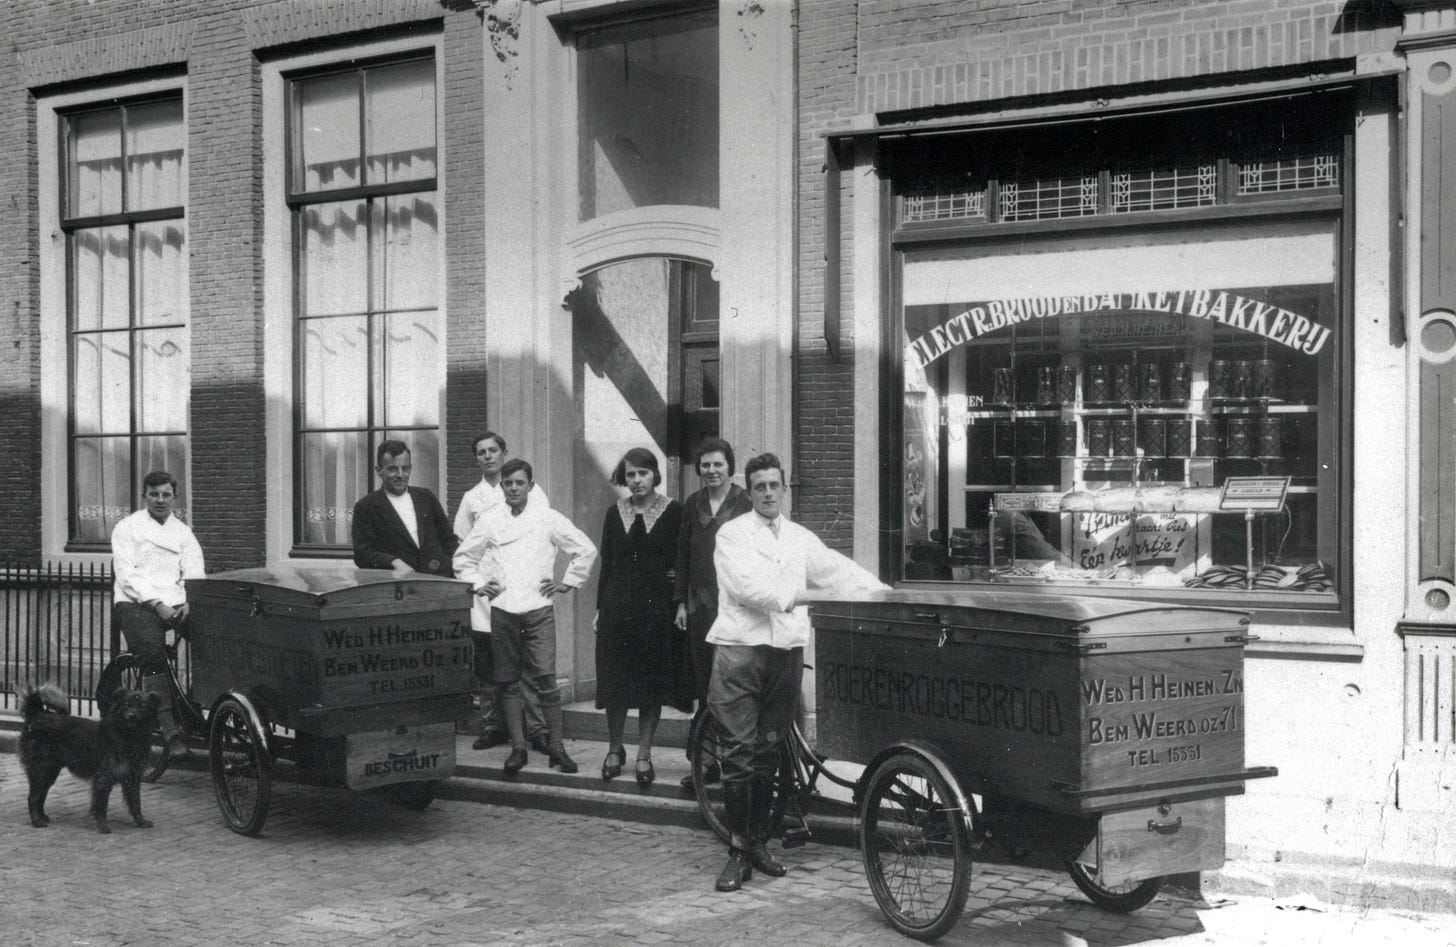 And old black and white photo showing a group of people stood infront of a bakery. There are 2 old cargobikes with them. On the cargobikes is painted text advertising the bakery